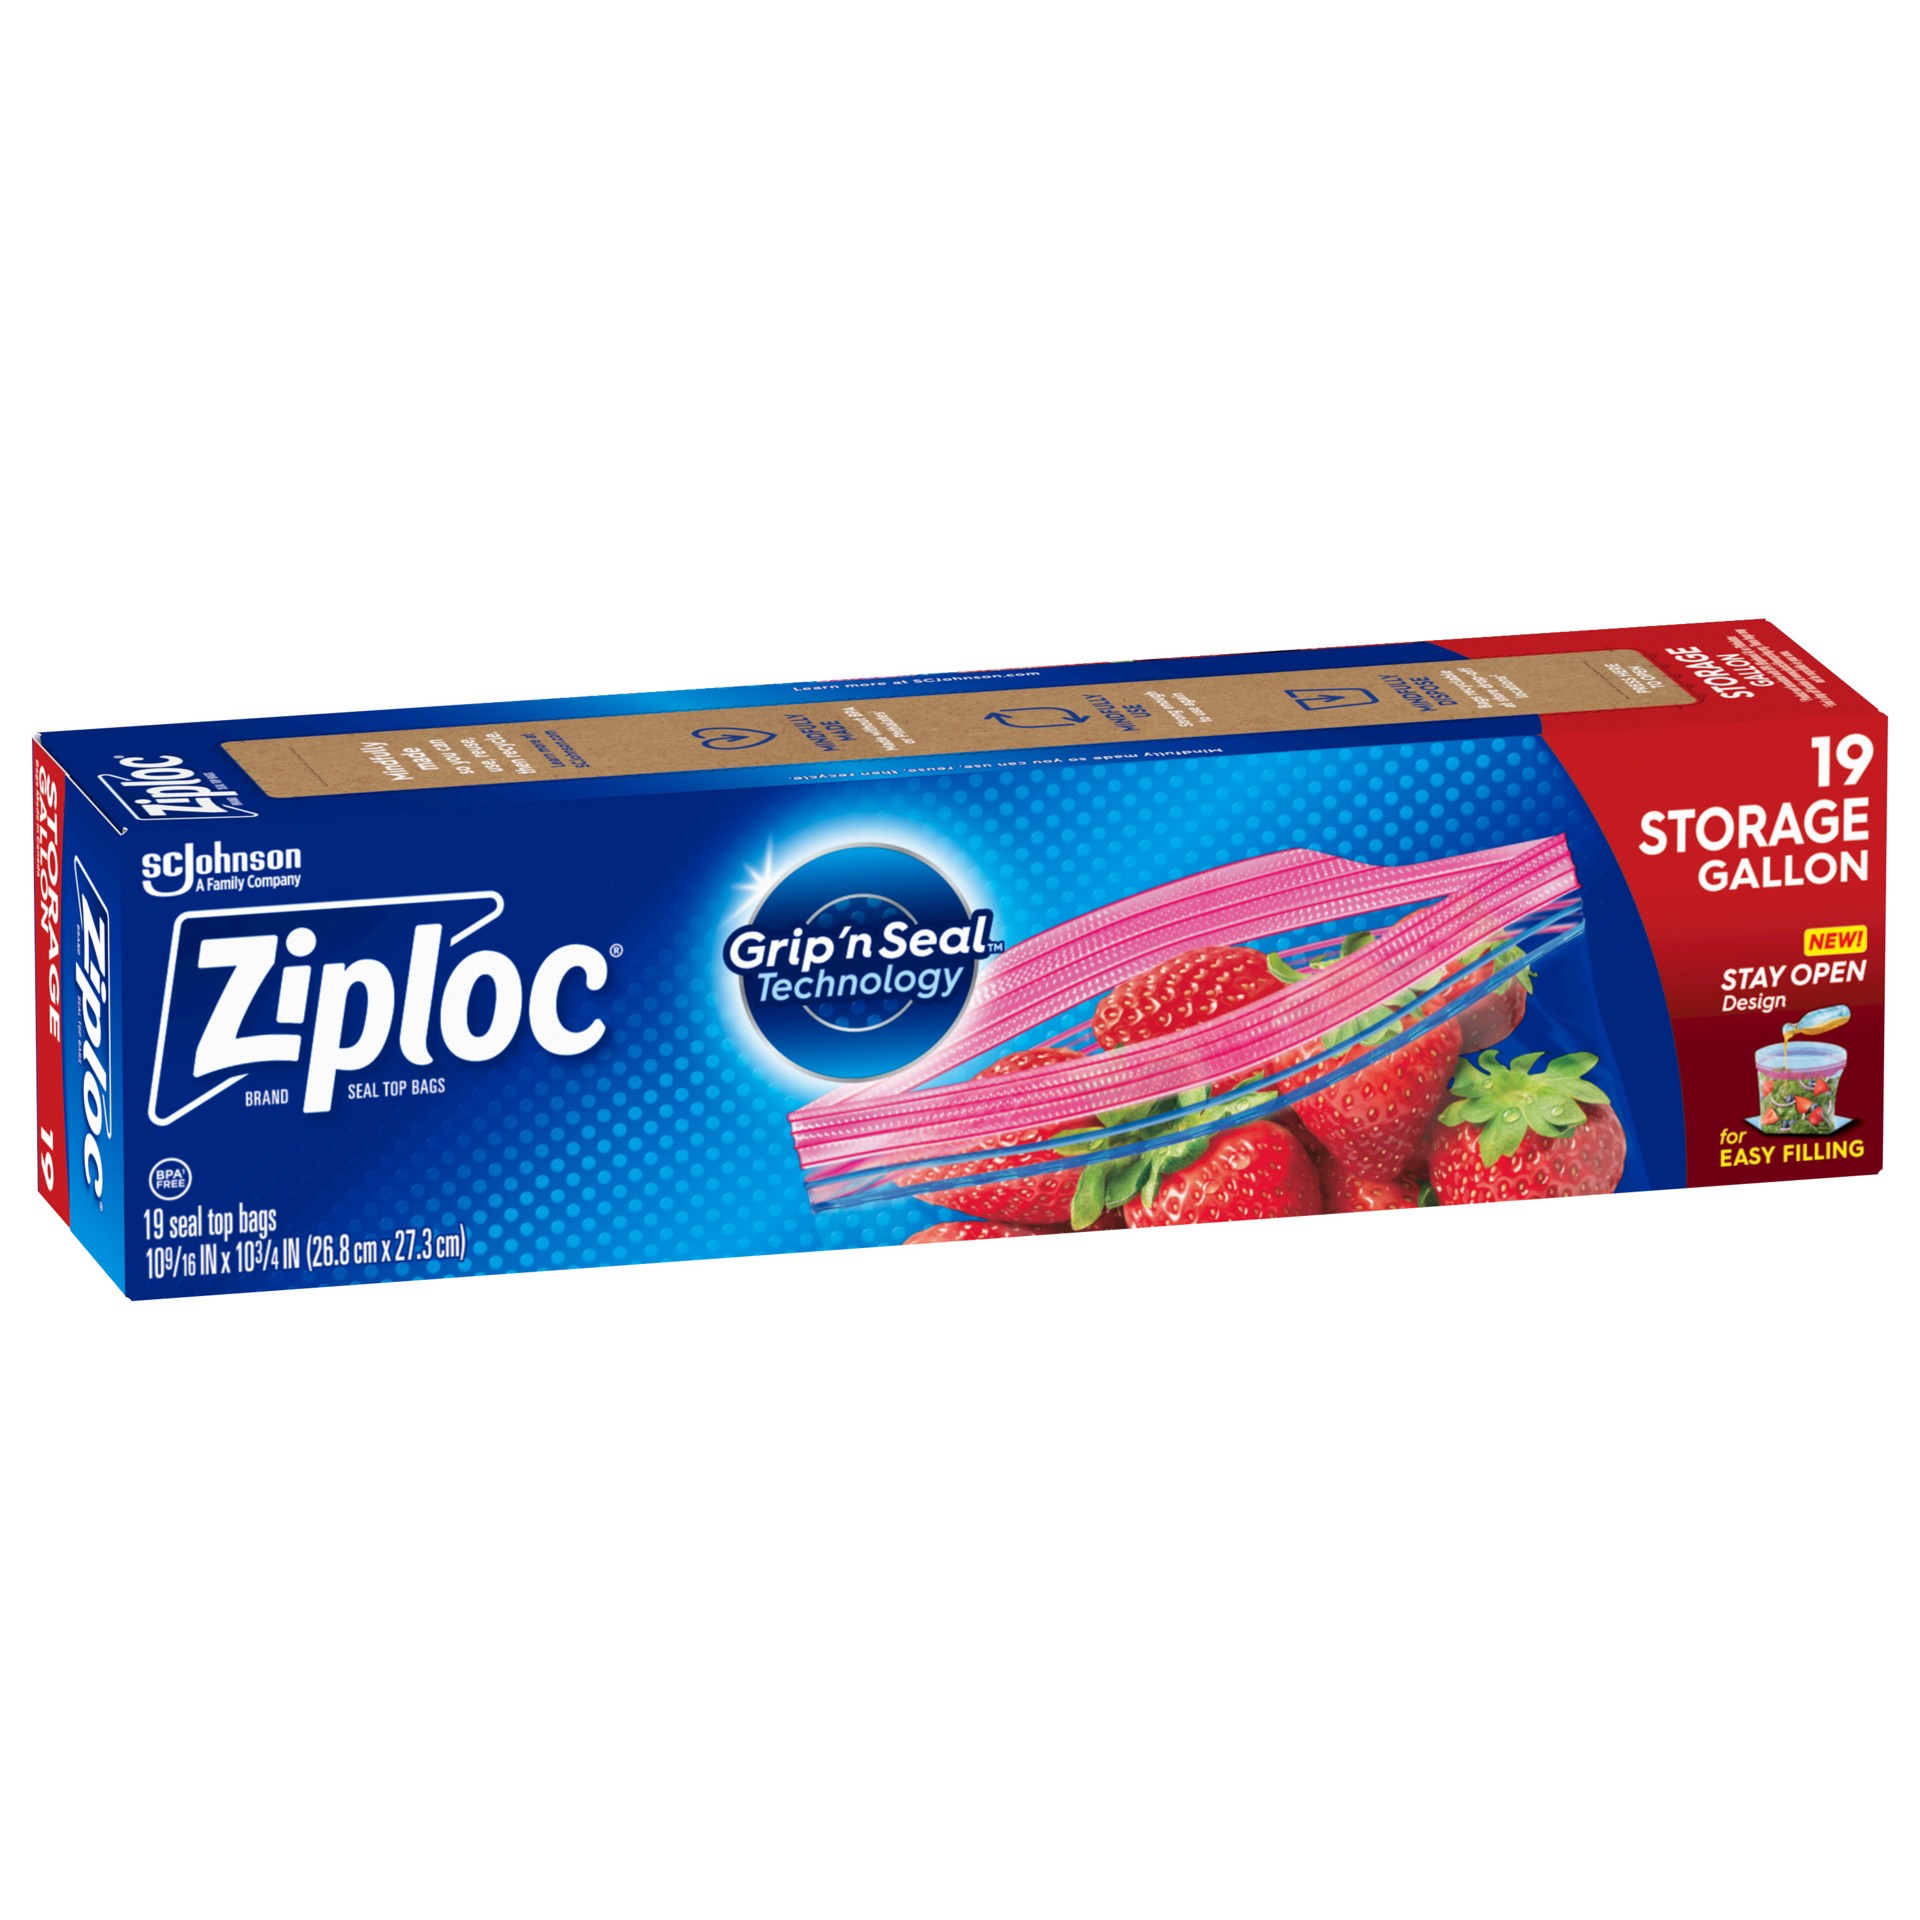 slide 3 of 5, Ziploc Brand Storage Bags with New Stay Open Design, Gallon, 19 Count, Patented Stand-up Bottom, Easy to Fill Food Storage Bags, Unloc a Free Set of Hands in the Kitchen, Microwave Safe, BPA Free, 19 ct